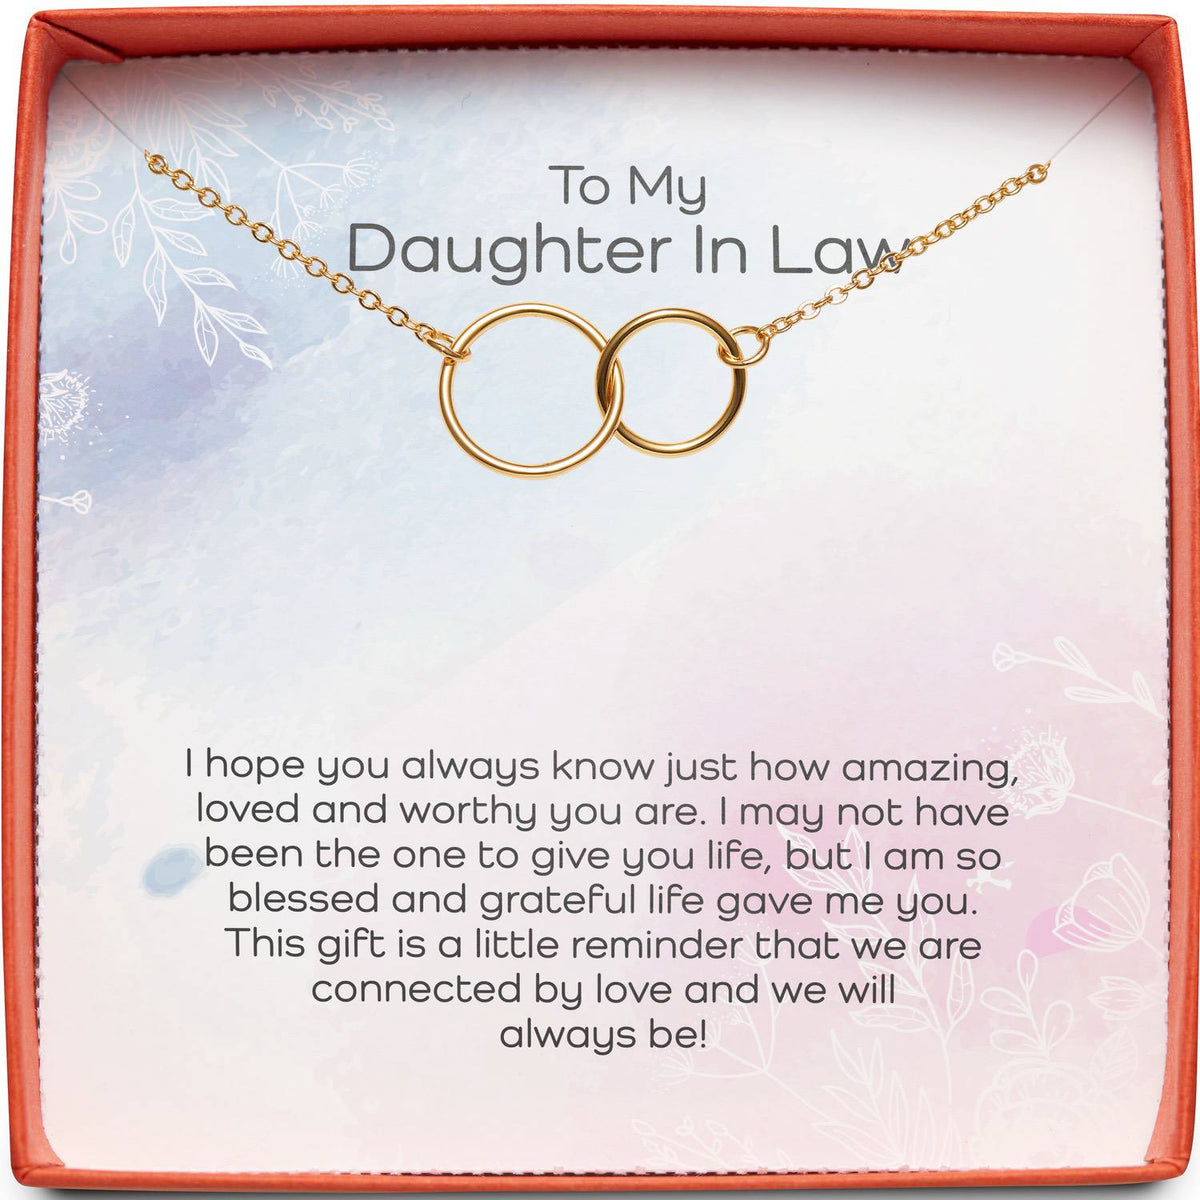 To My Daughter in Law | Connected By Love | Interlocking Circles